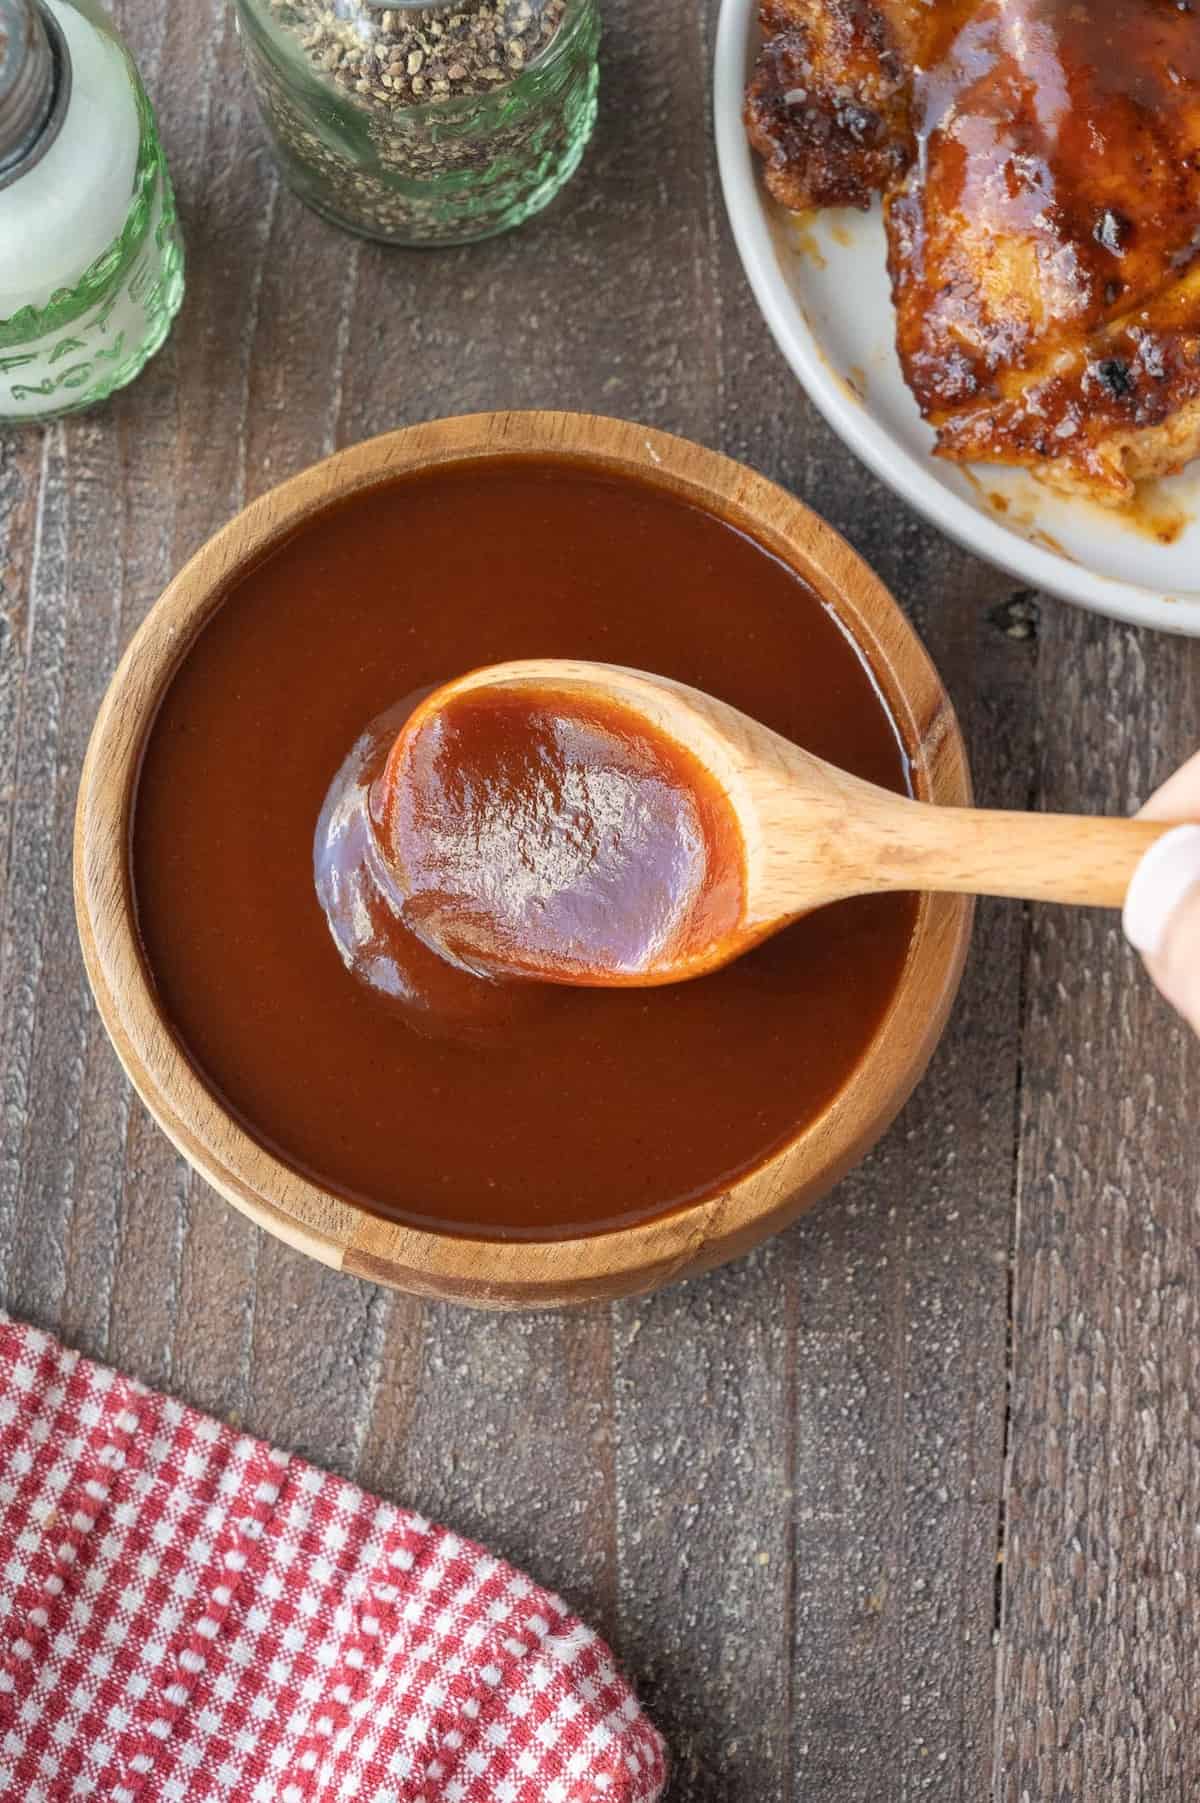 A wooden spoon in a bowl of BBQ sauce.